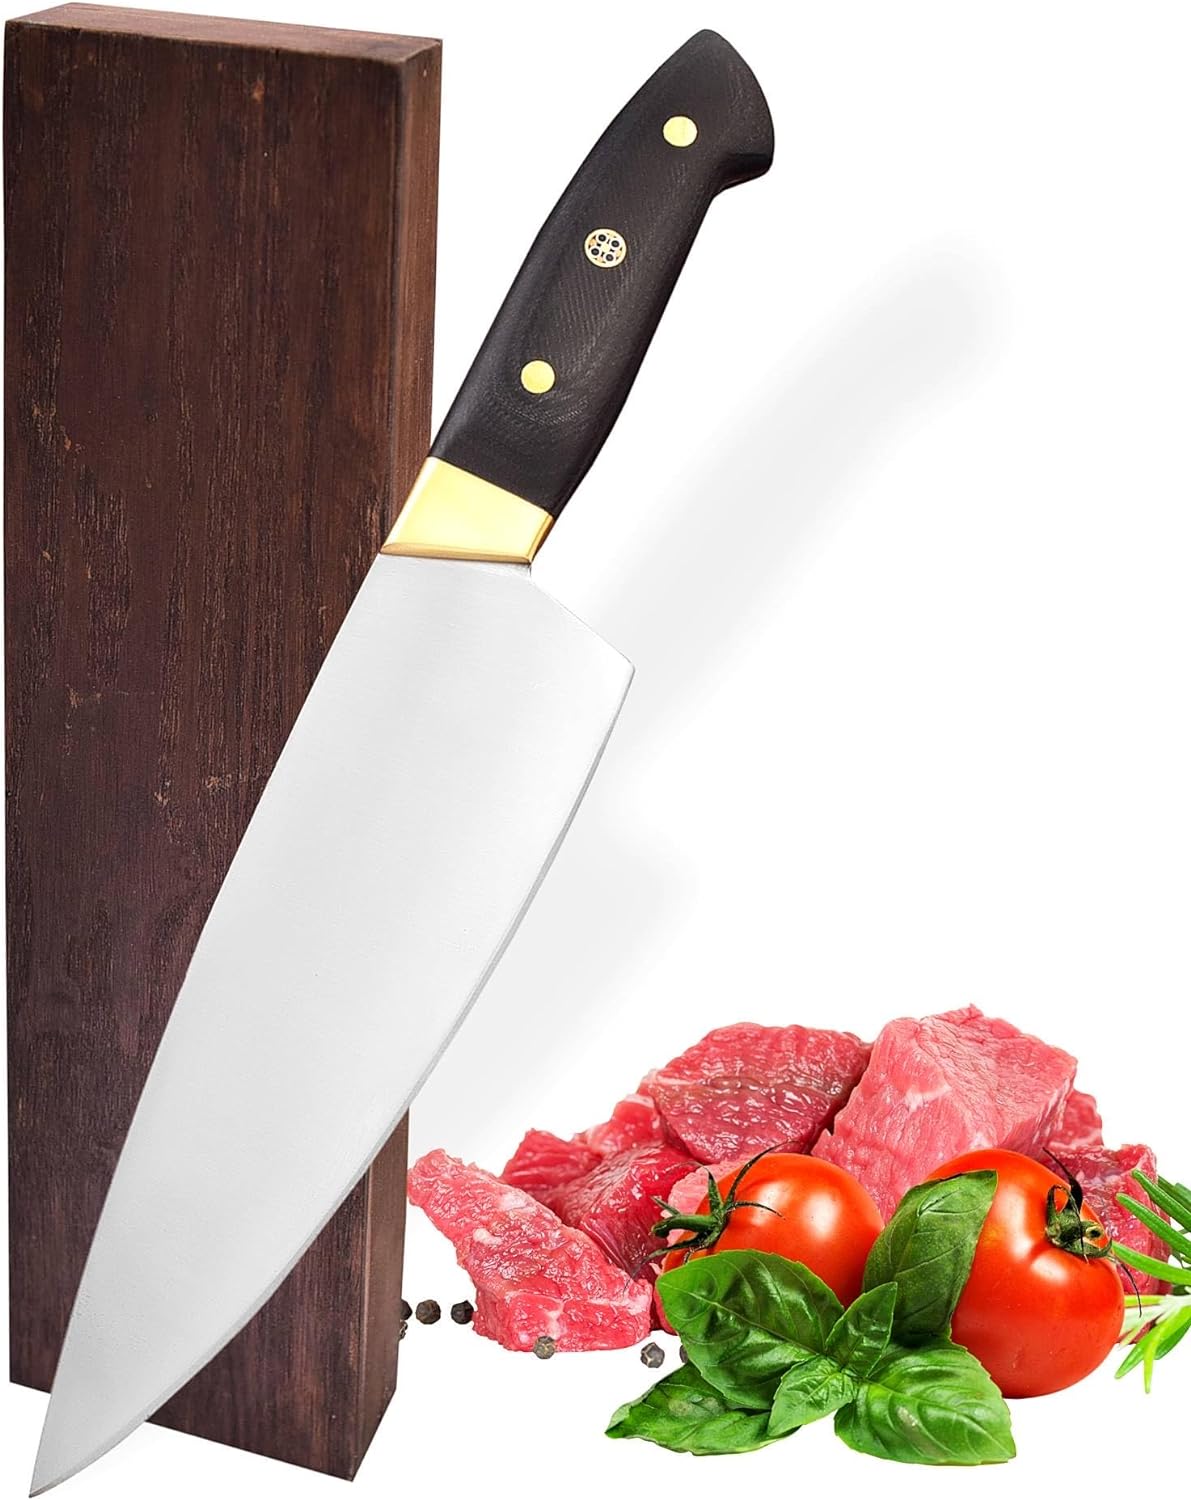 Chef Knife 13 Inches Professional Kitchen Knife with Wooden Box | High Carbon Steel Blade